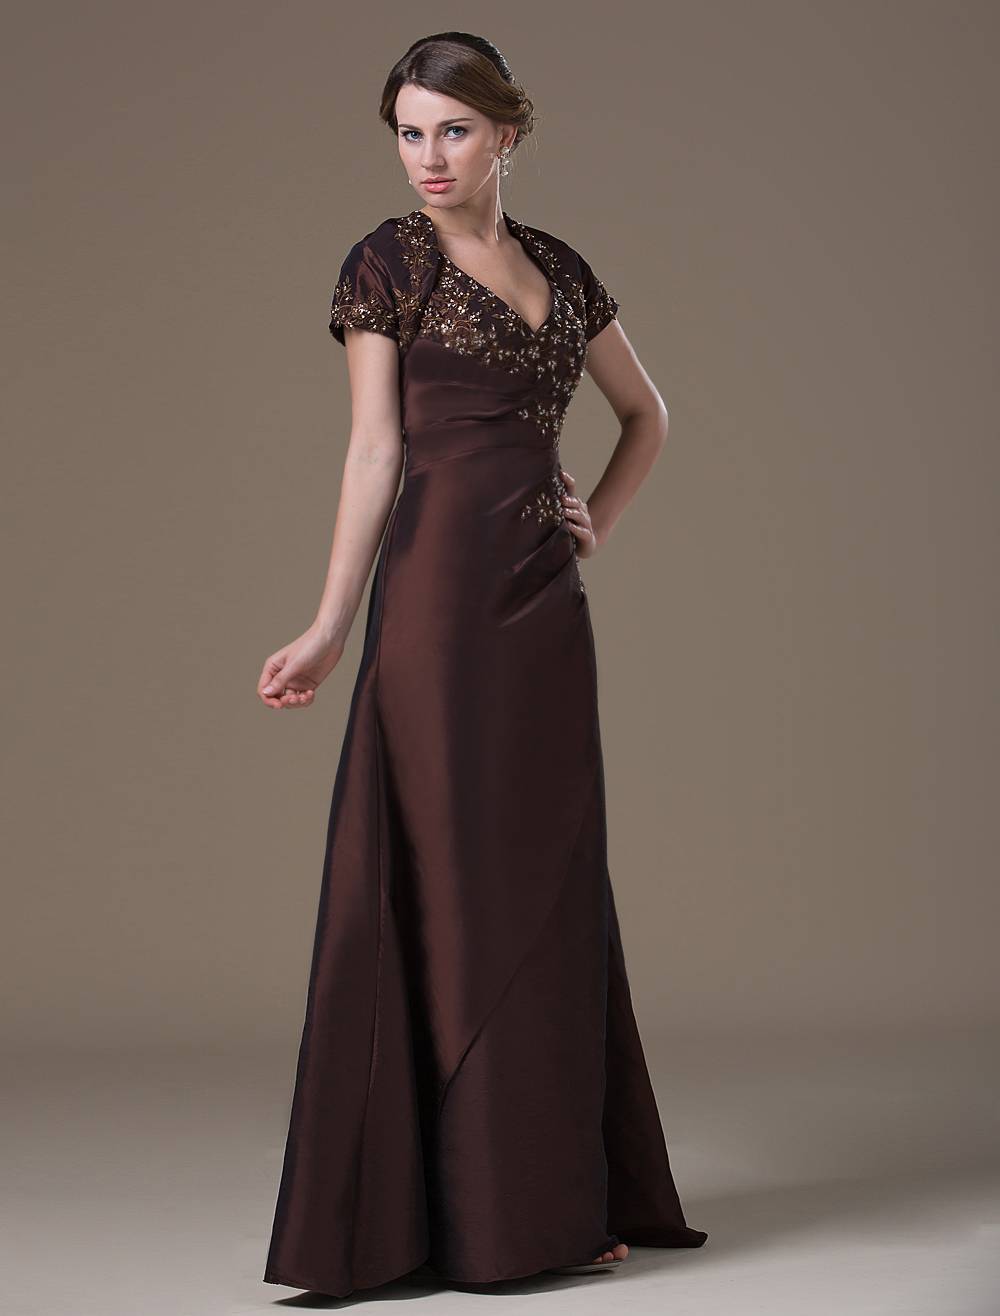 Chocolate A-line Backless Taffeta Fashion Dress For Mother of the Bride ...